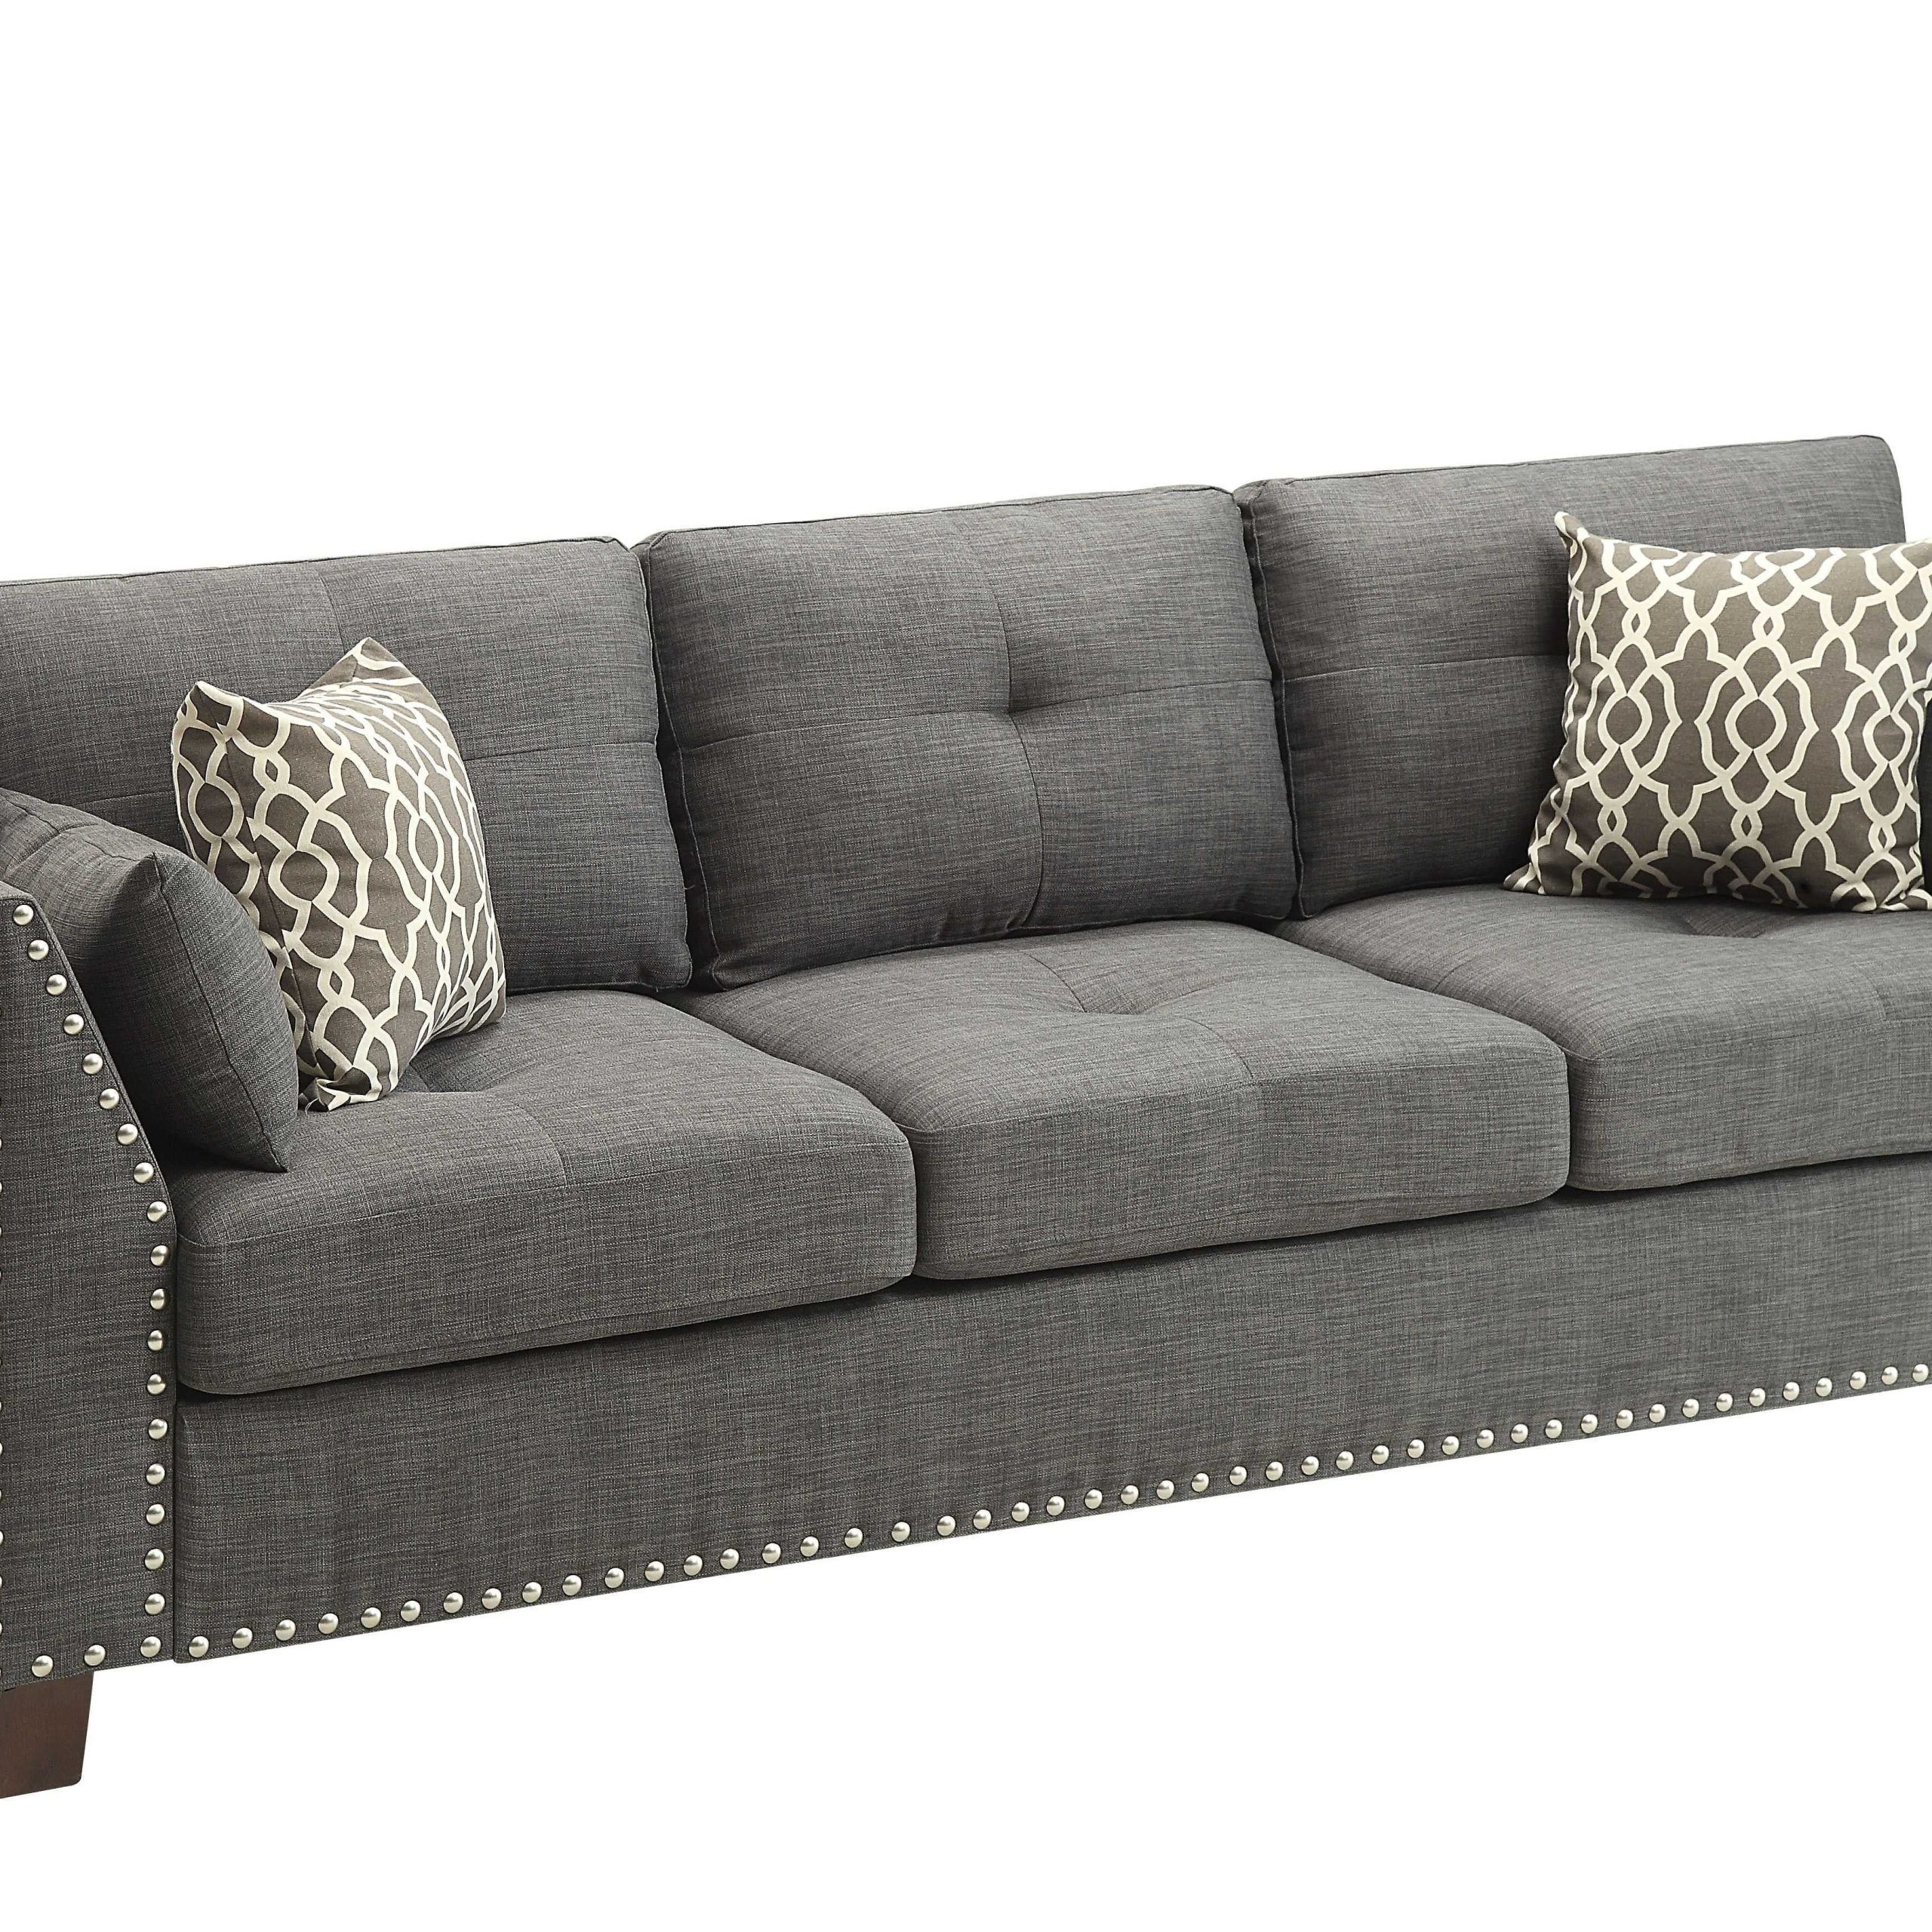 Sofa In Light Charcoal Linen – Linen, Eucalyptus, Plywood, Foam With Regard To Light Charcoal Linen Sofas (Gallery 5 of 20)